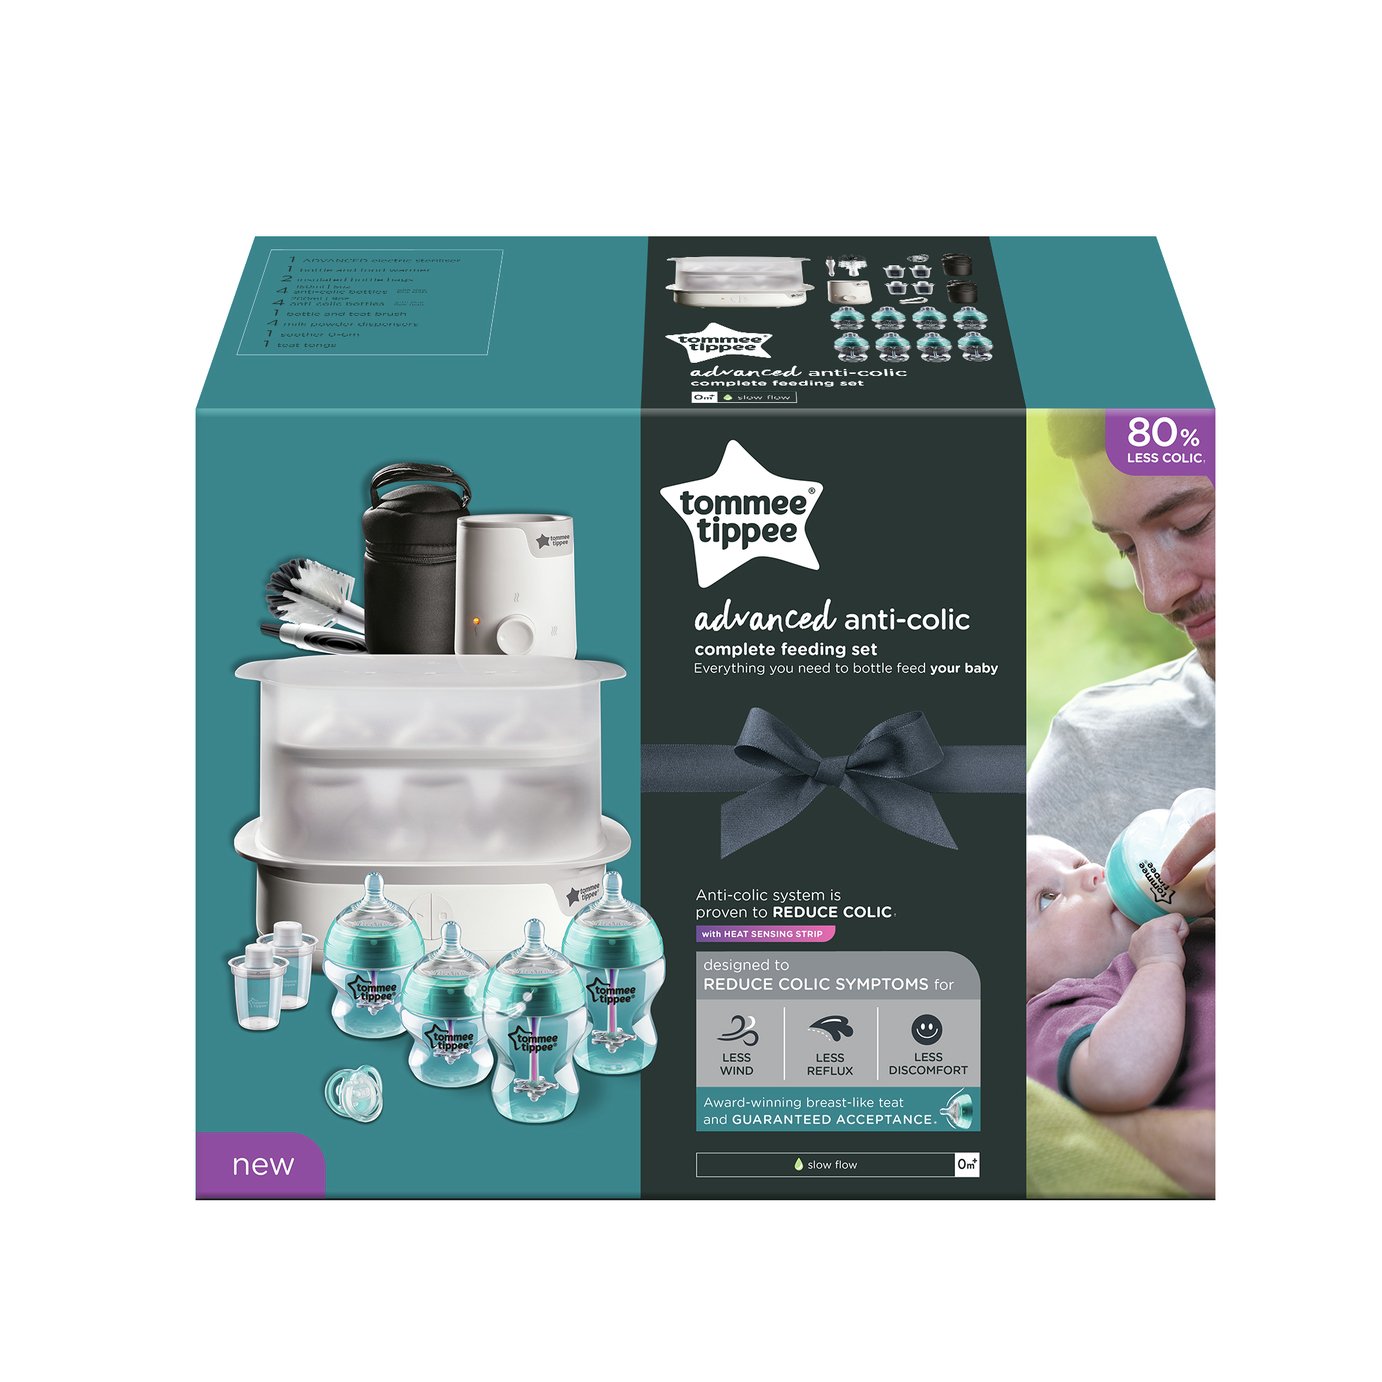 Tommee Tippee Advanced Anti-Colic Complete Feeding Kit Review